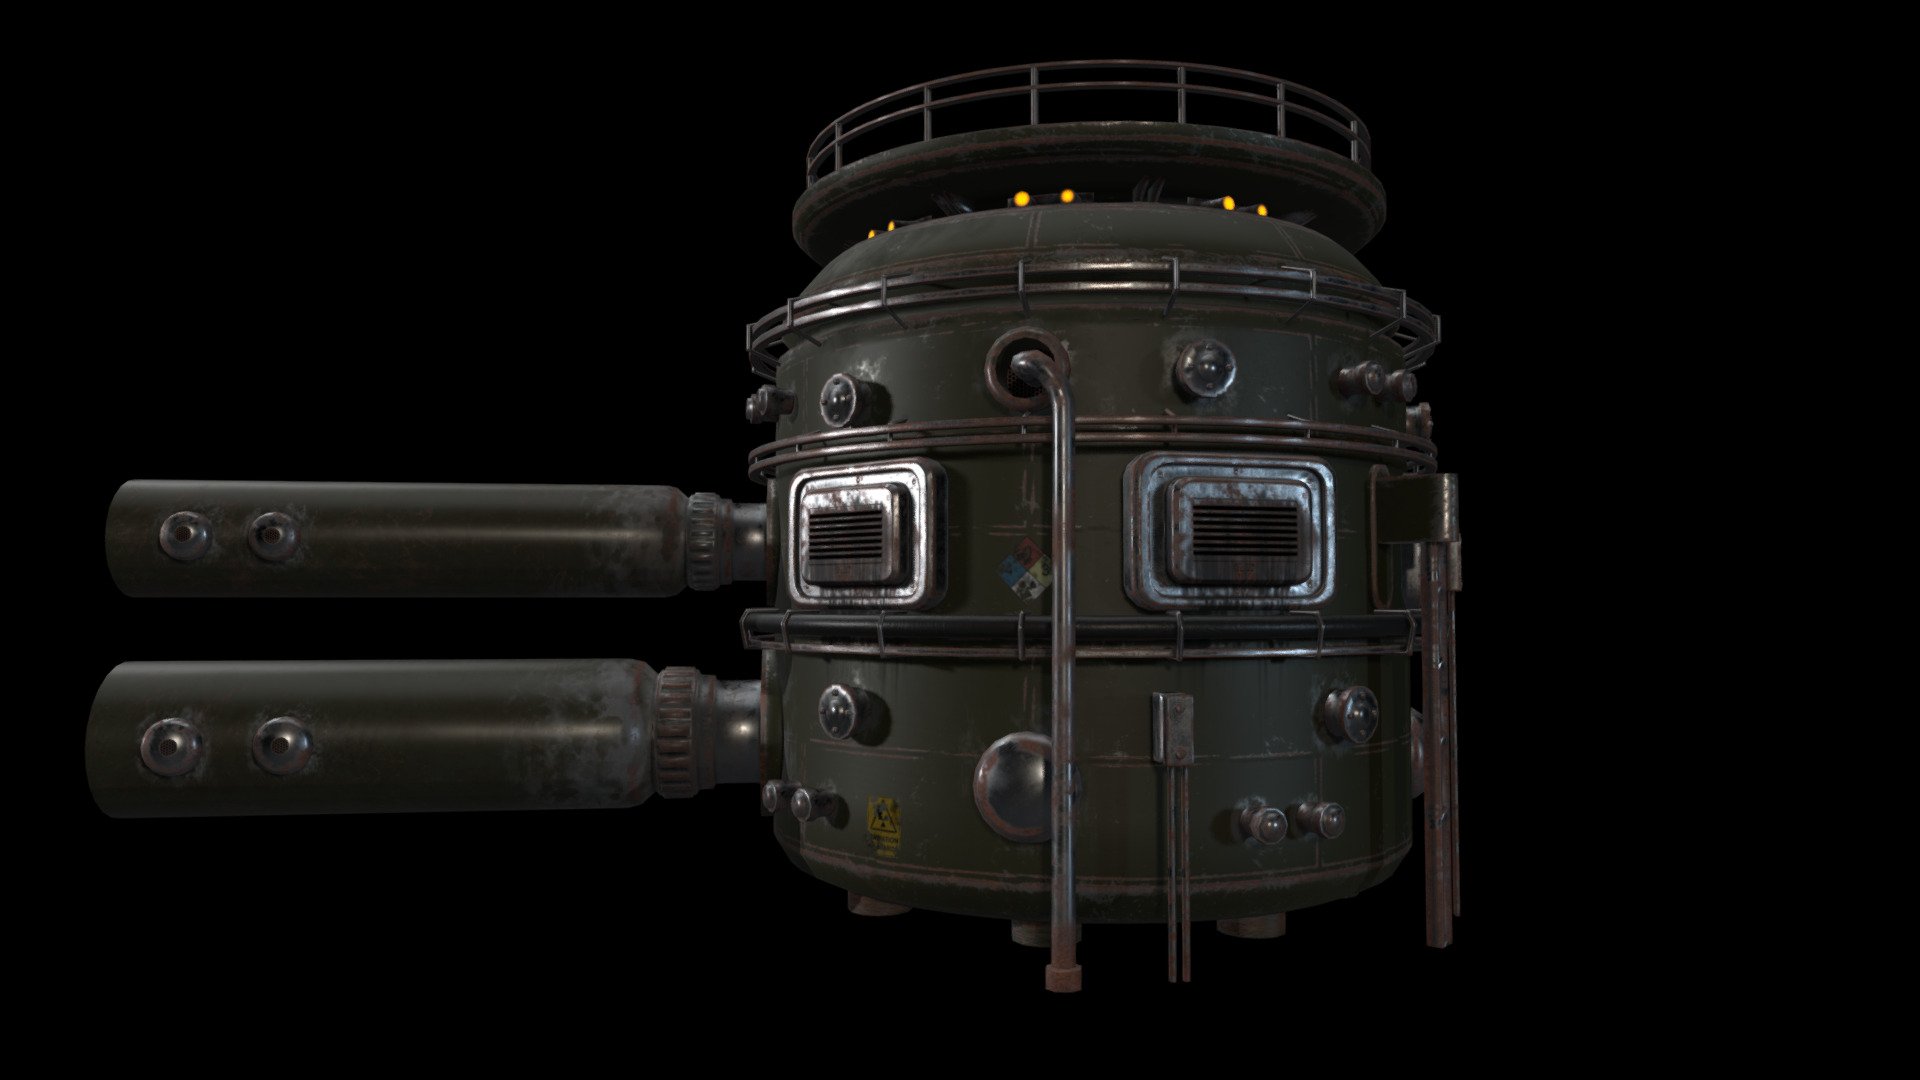 This is an old, worn sci-fi reactor. It was a challengin aspect texture-wise, but I was happy with the result.
Based off of an unused concpet of Fallout 4 made by Bethesda.
Concept can be found here:
http://fallout.wikia.com/wiki/The_Art_of_Fallout_4?file=Art_of_FO4_Institute_Reactor.jpg - Weathered Sci-fi Reactor Core - 3D model by PeytonThomas 3d model